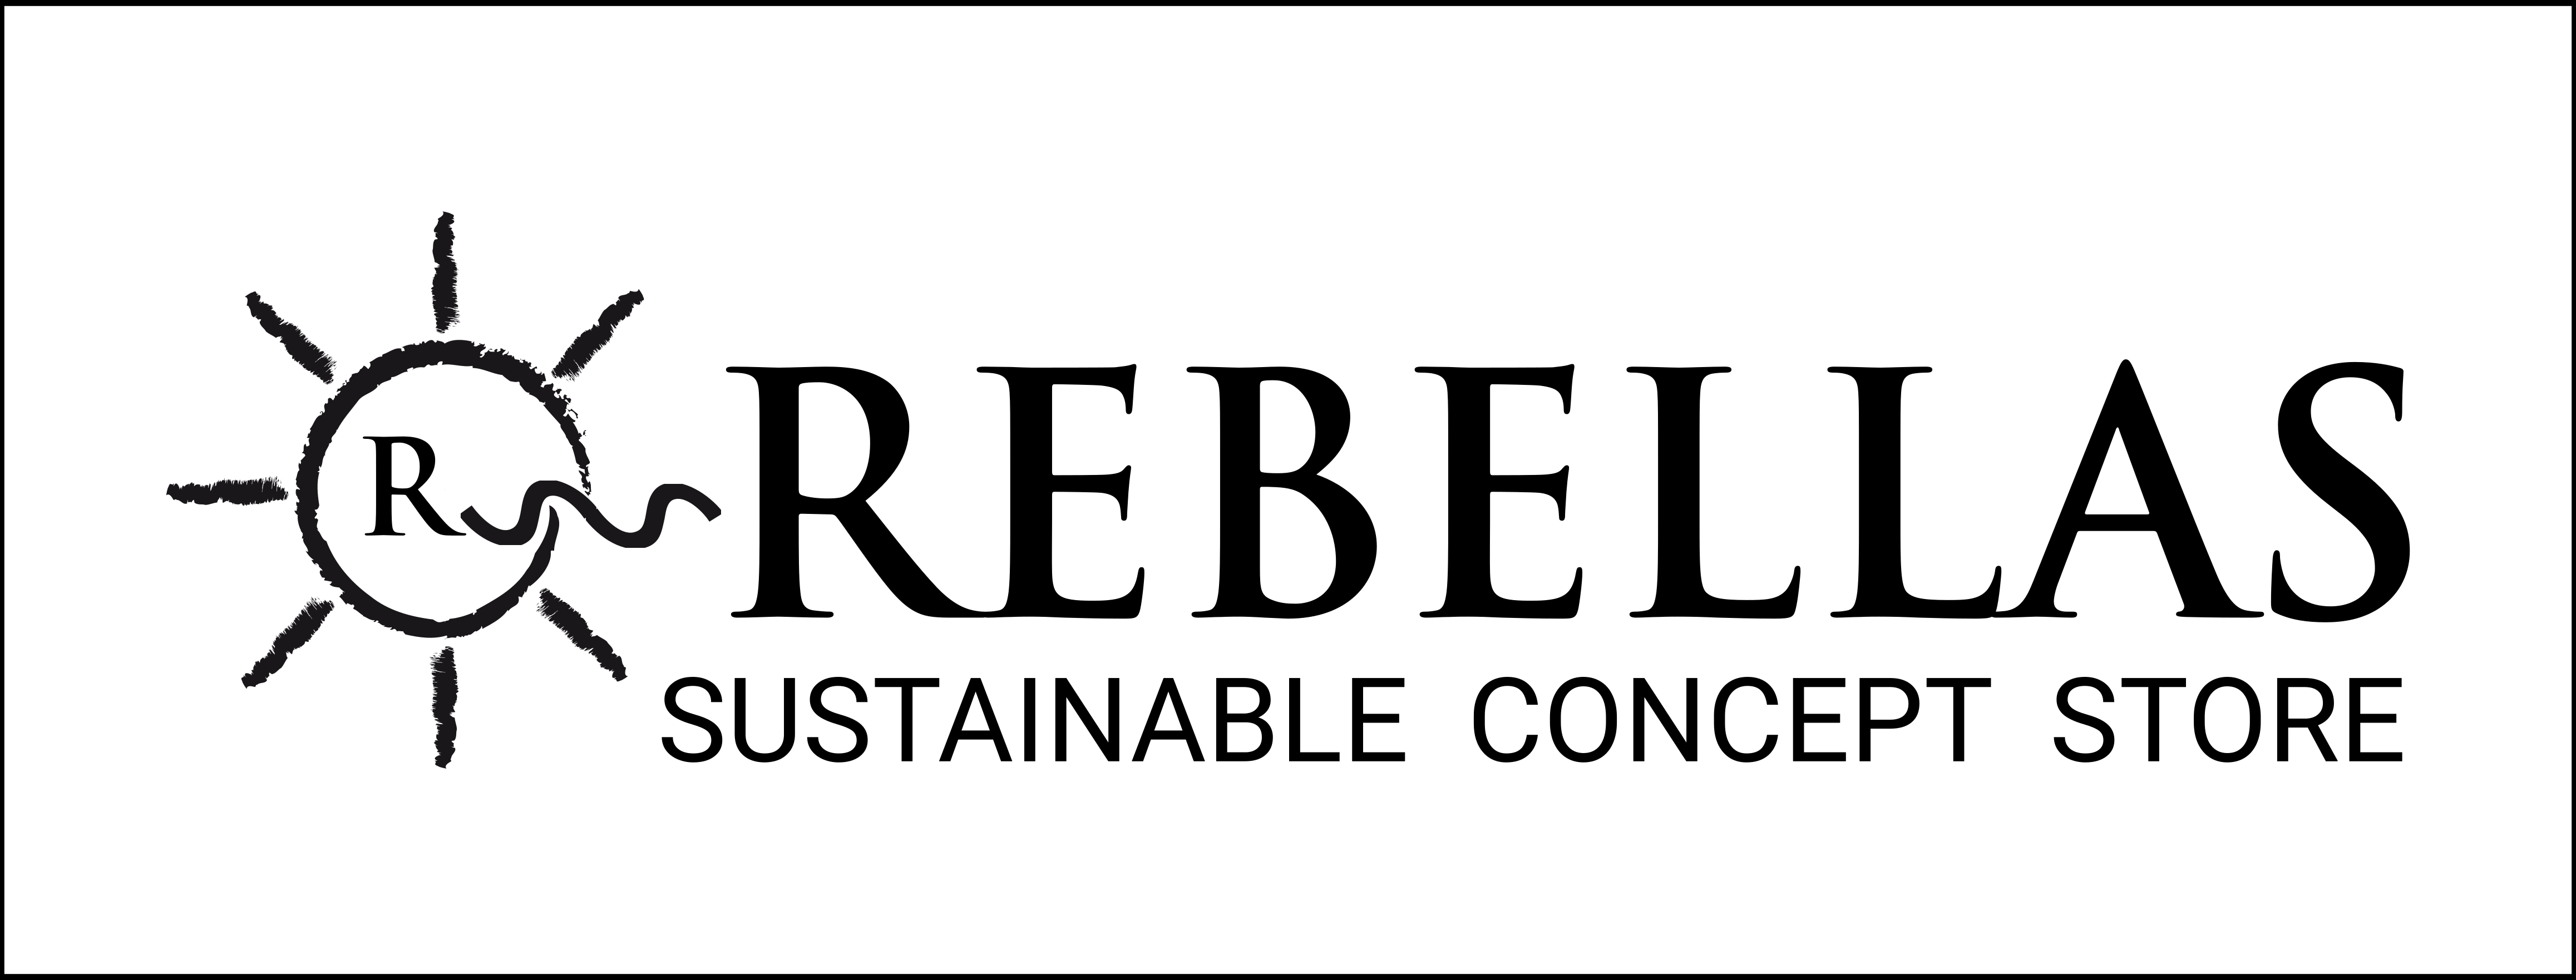 REBELLAS
Sustainable
Concepts
&
Store